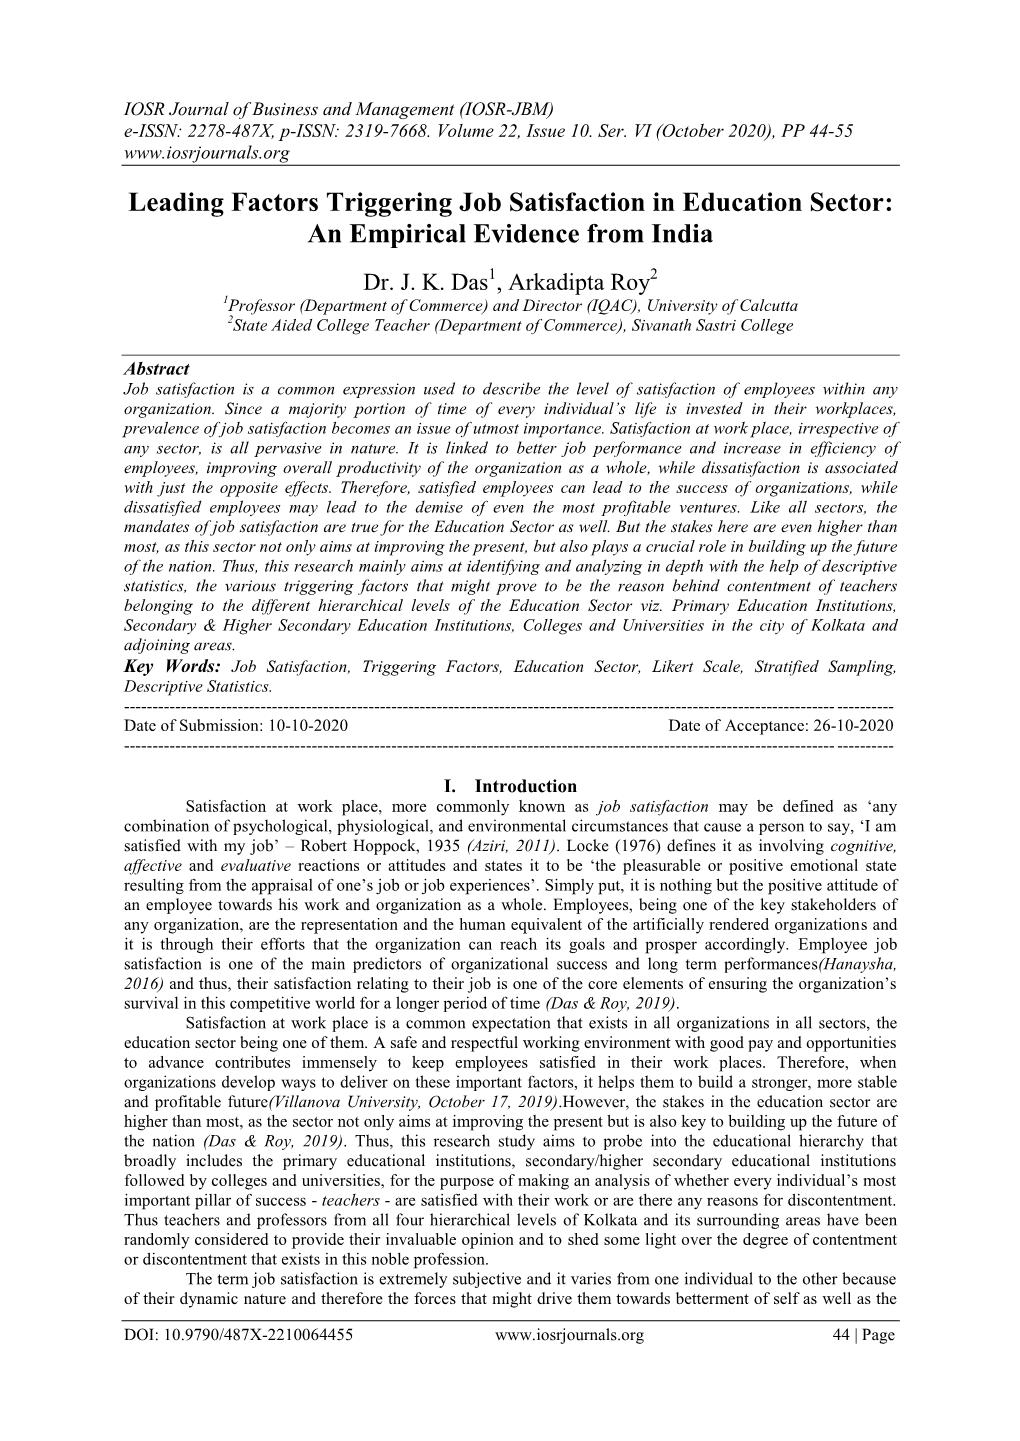 Leading Factors Triggering Job Satisfaction in Education Sector: an Empirical Evidence from India